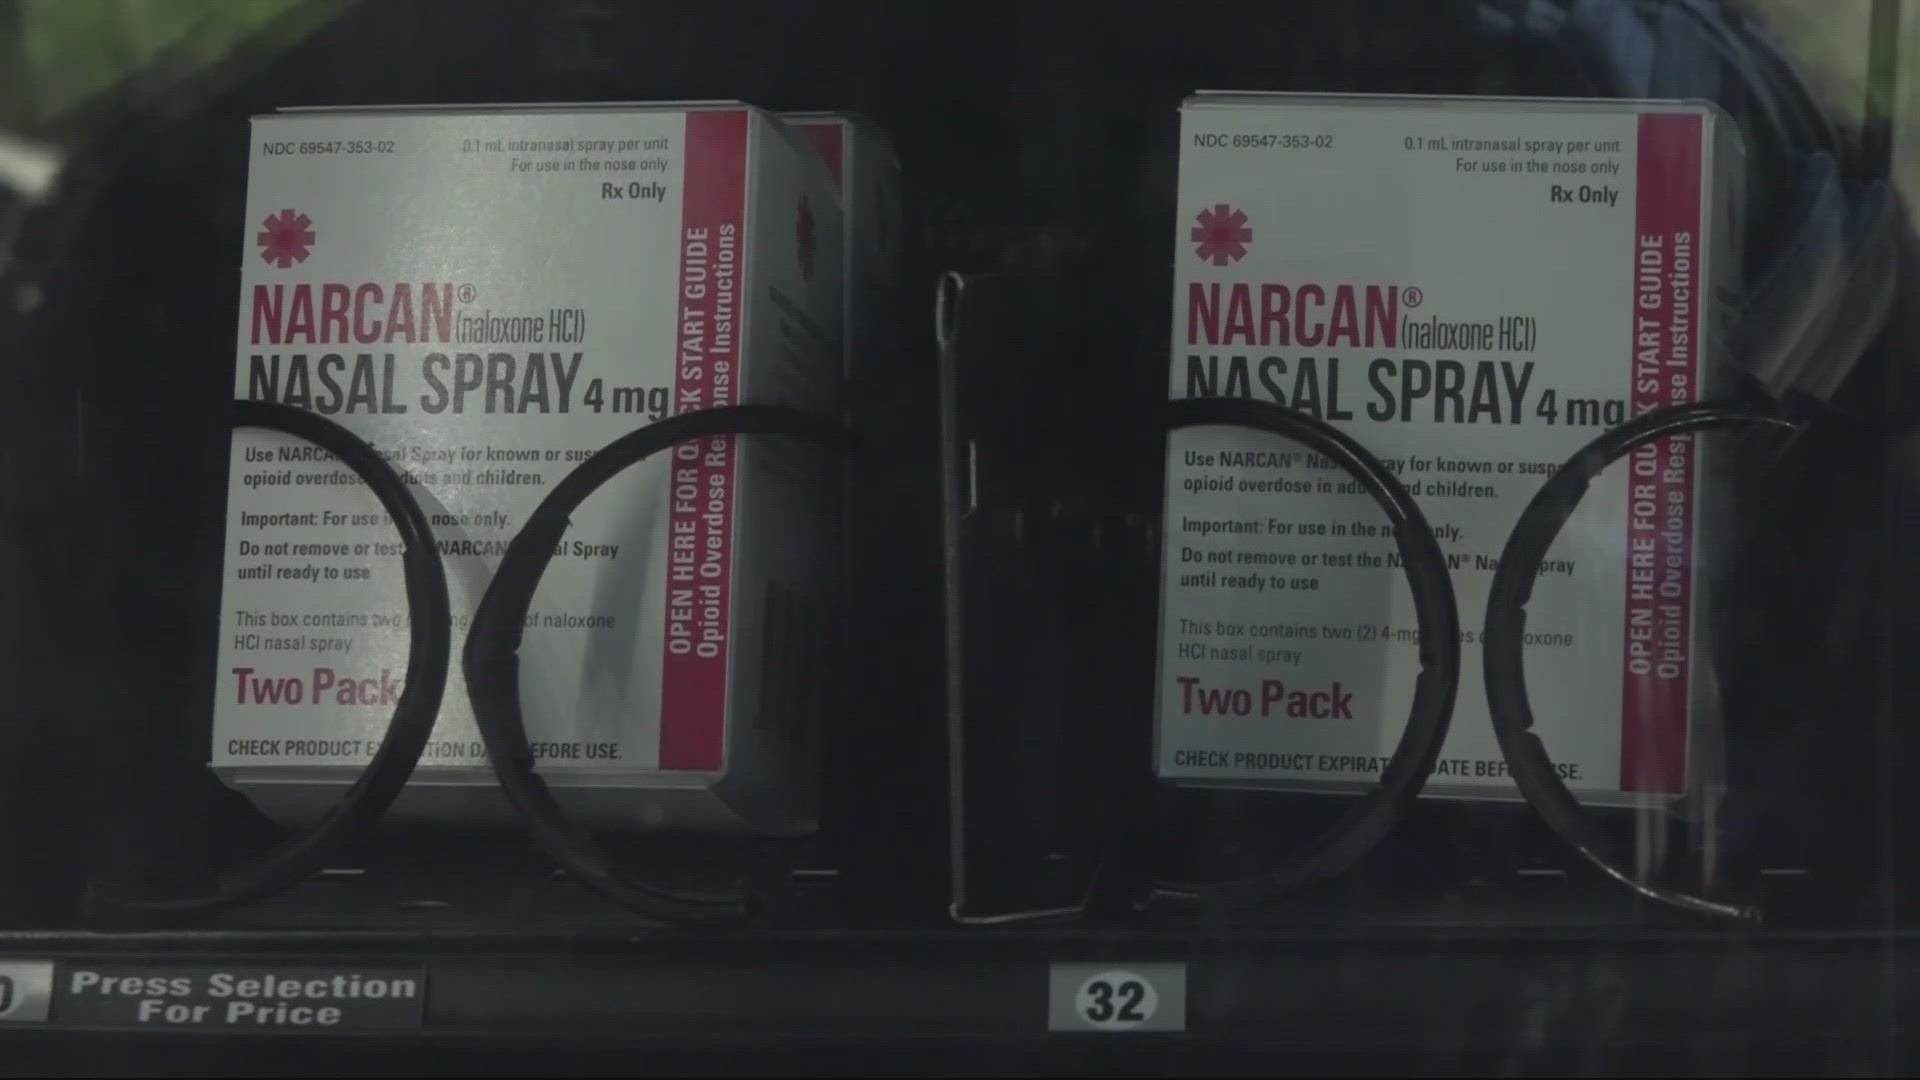 Narcan can help someone is experiencing an overdose